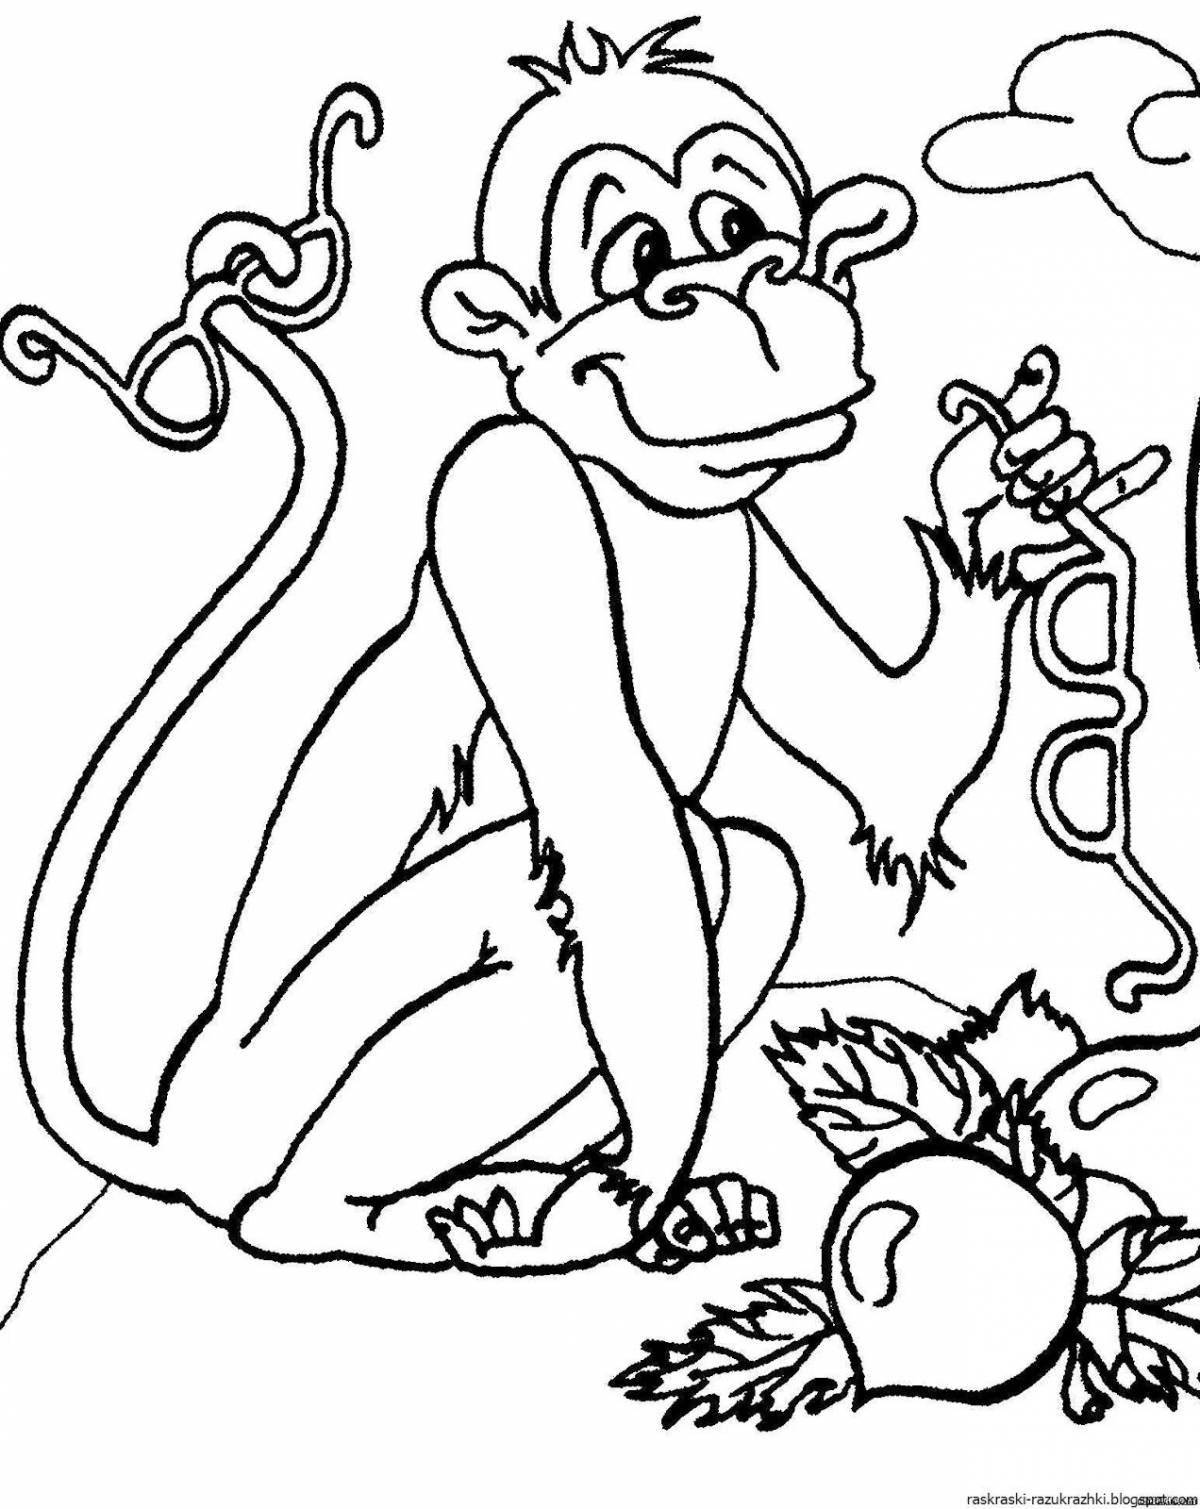 Fun coloring monkey and glasses